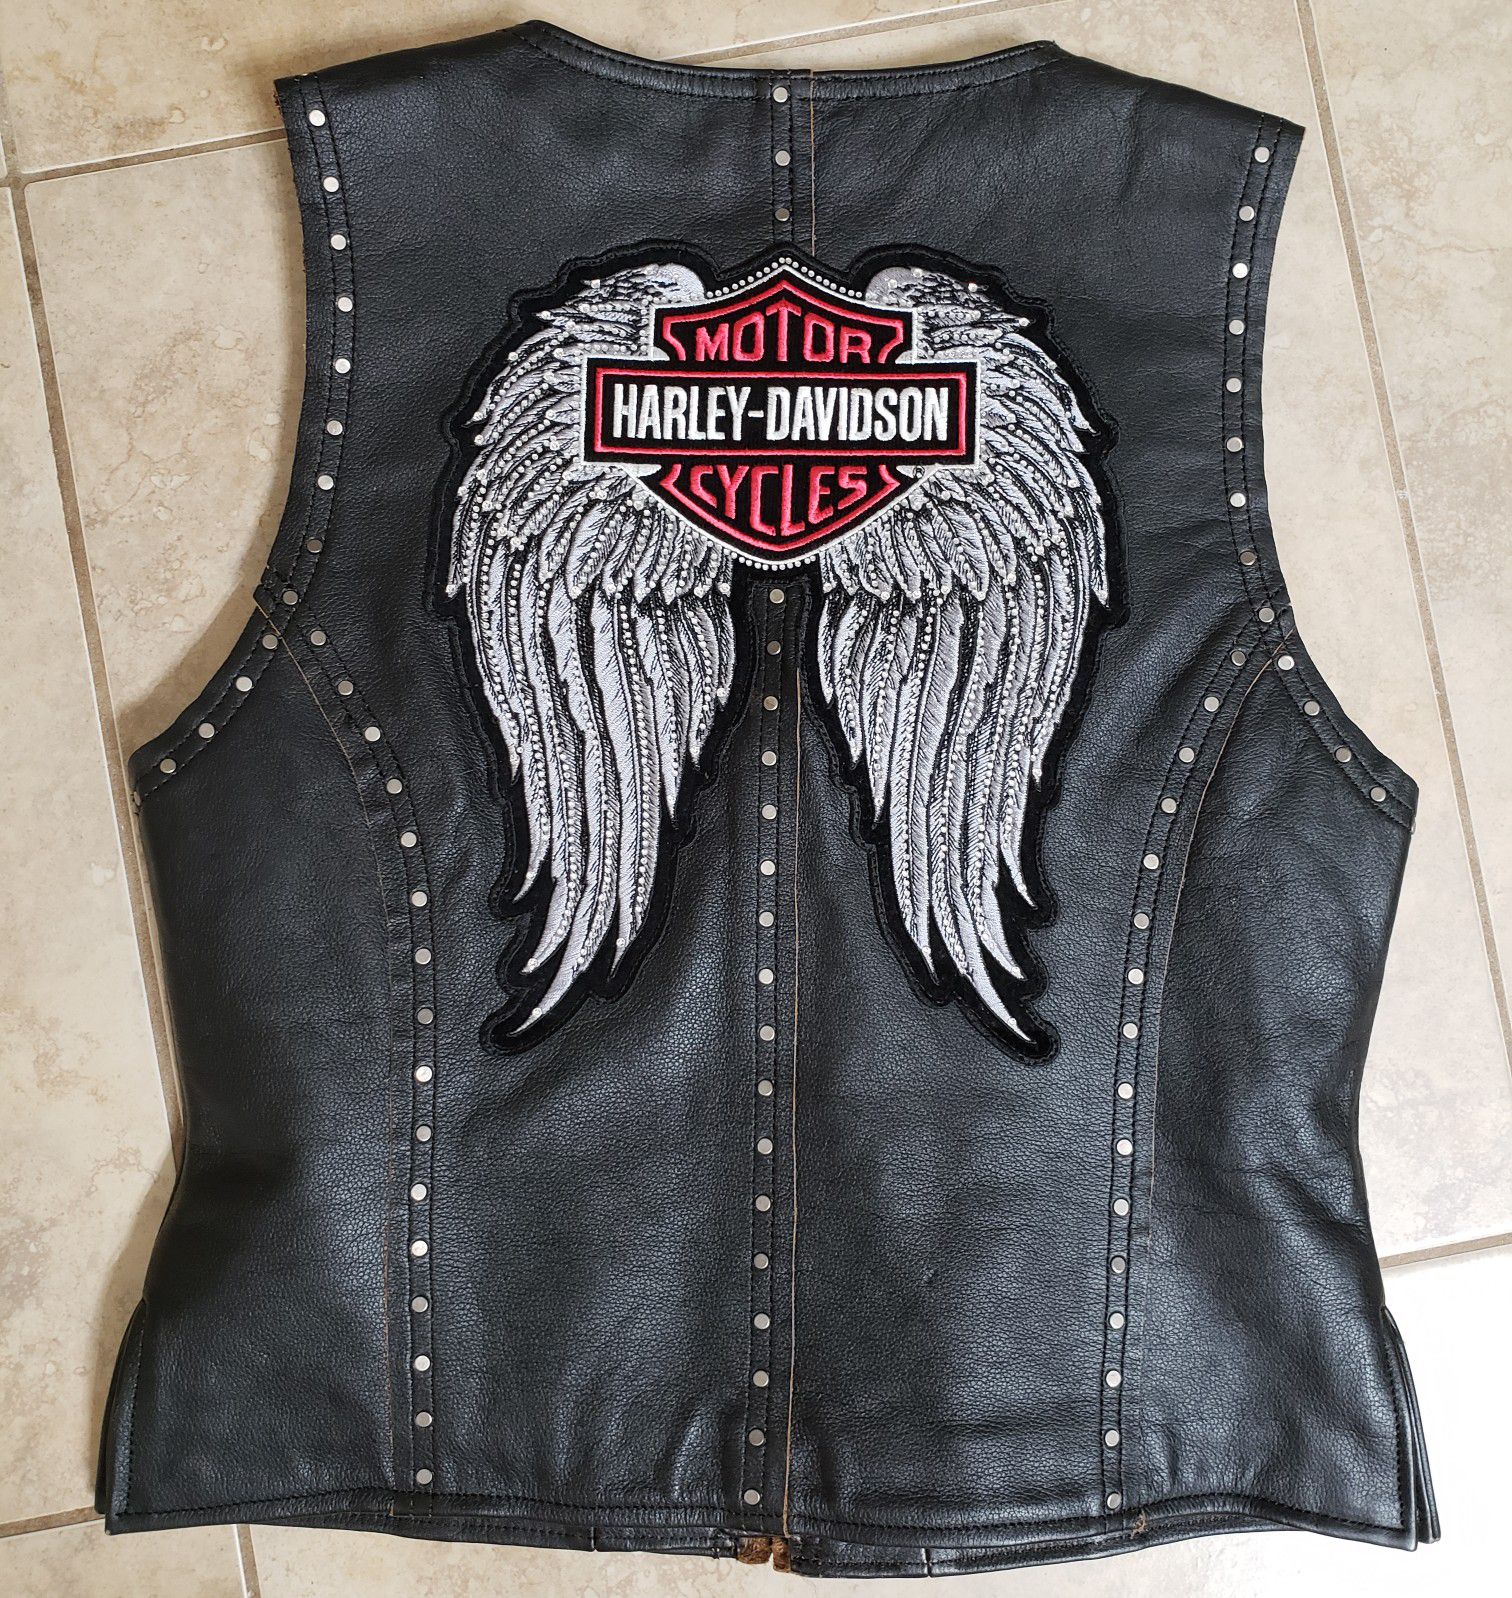 Harley Davidson small bling leather motorcycle vest